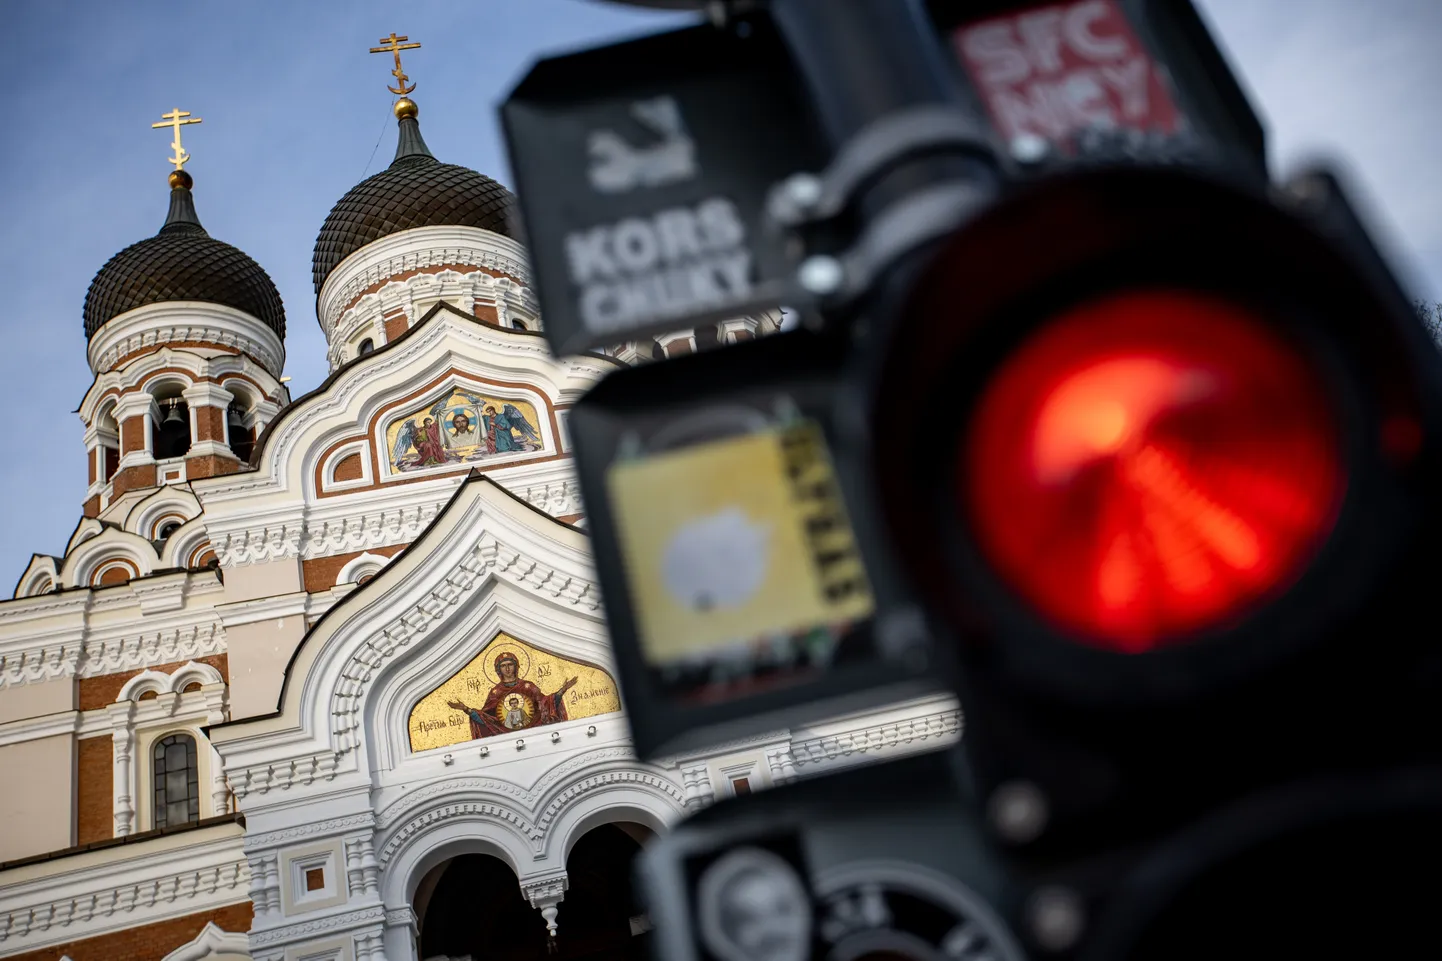 Parliament declares Moscow Patriarchate an institution sponsoring Russian aggression.